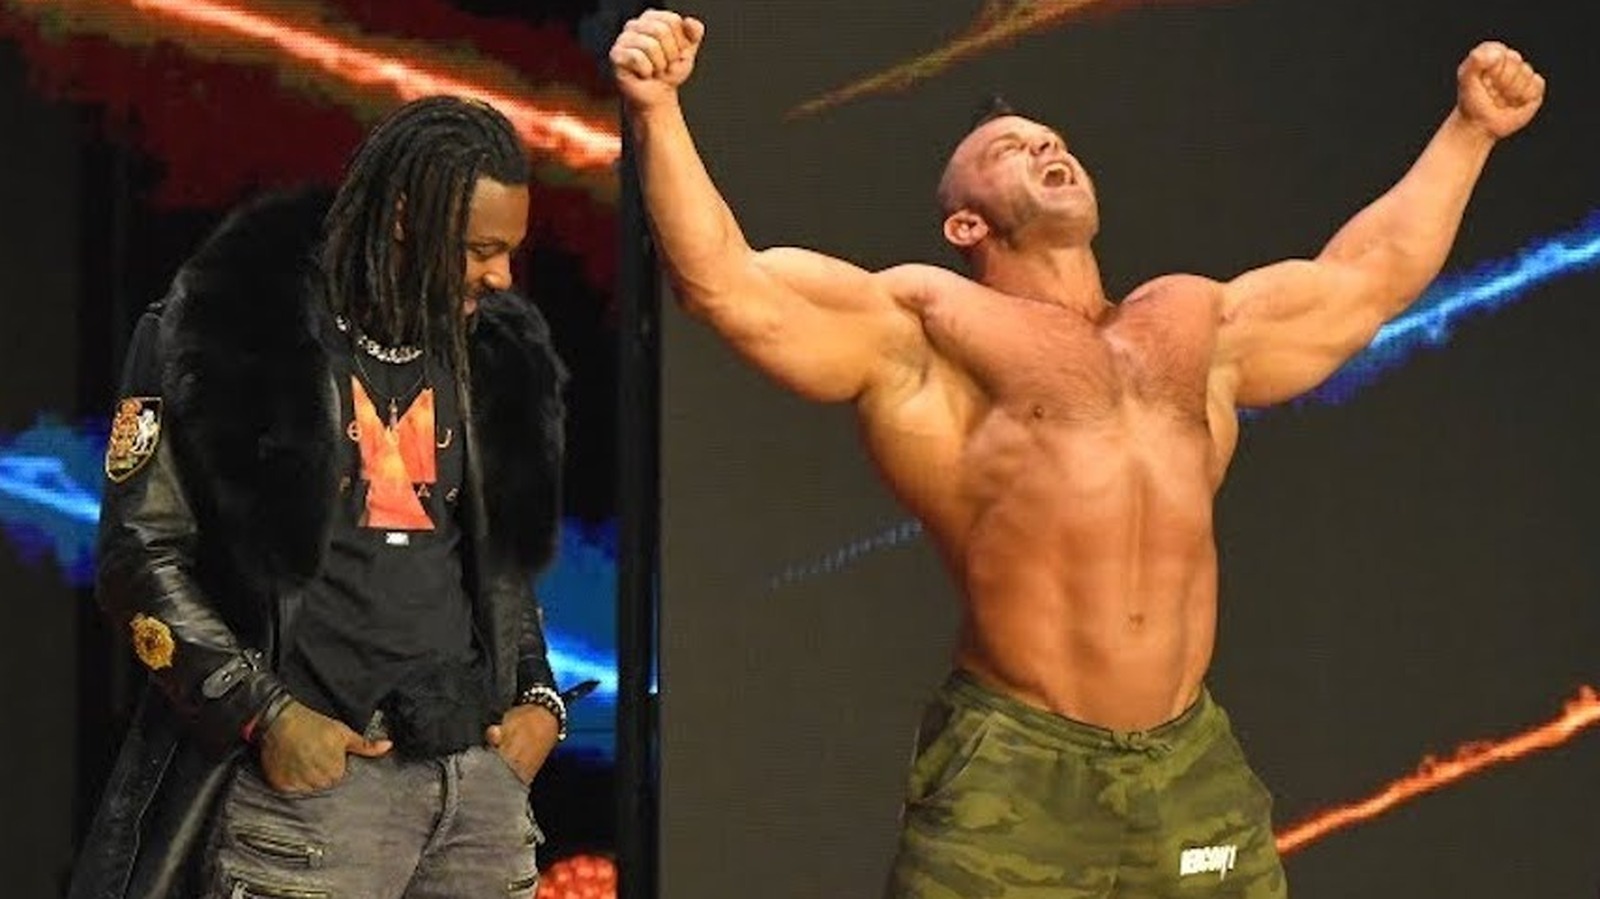 Mogul Embassy Turns On Swerve Strickland, Allies With Christian Cage On AEW Dynamite